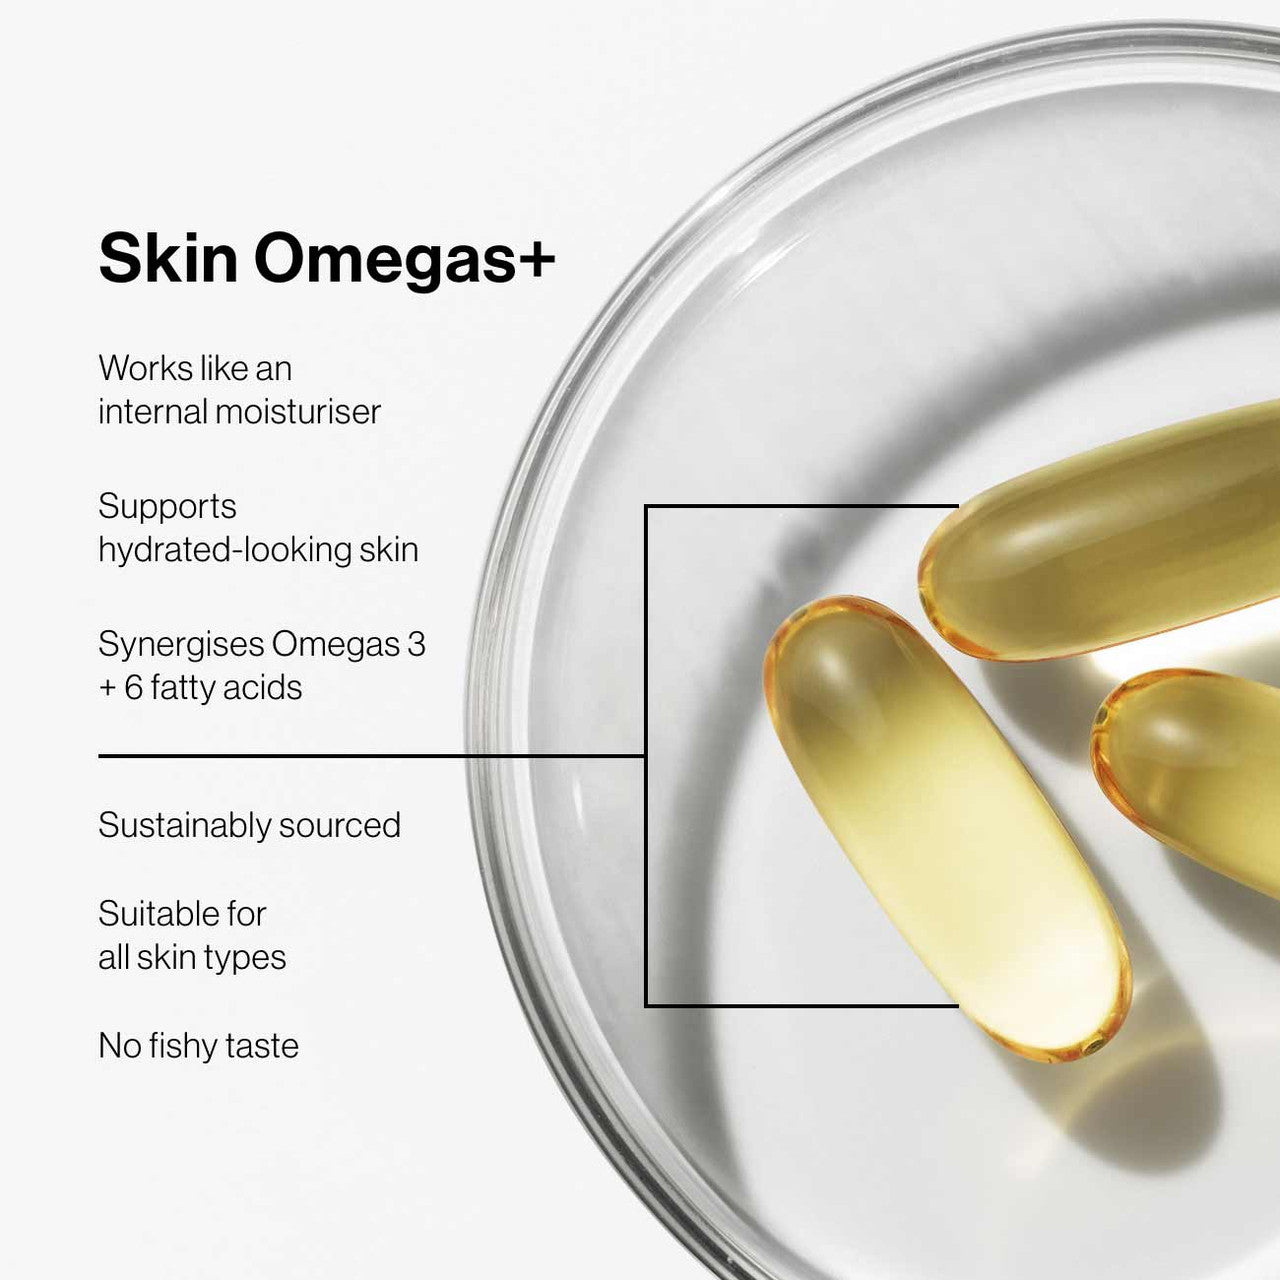 Advanced Nutrition Programme's Skin Skin Omegas+ description on how it can help and what are the benefits - Free Shipping for orders above $300.00